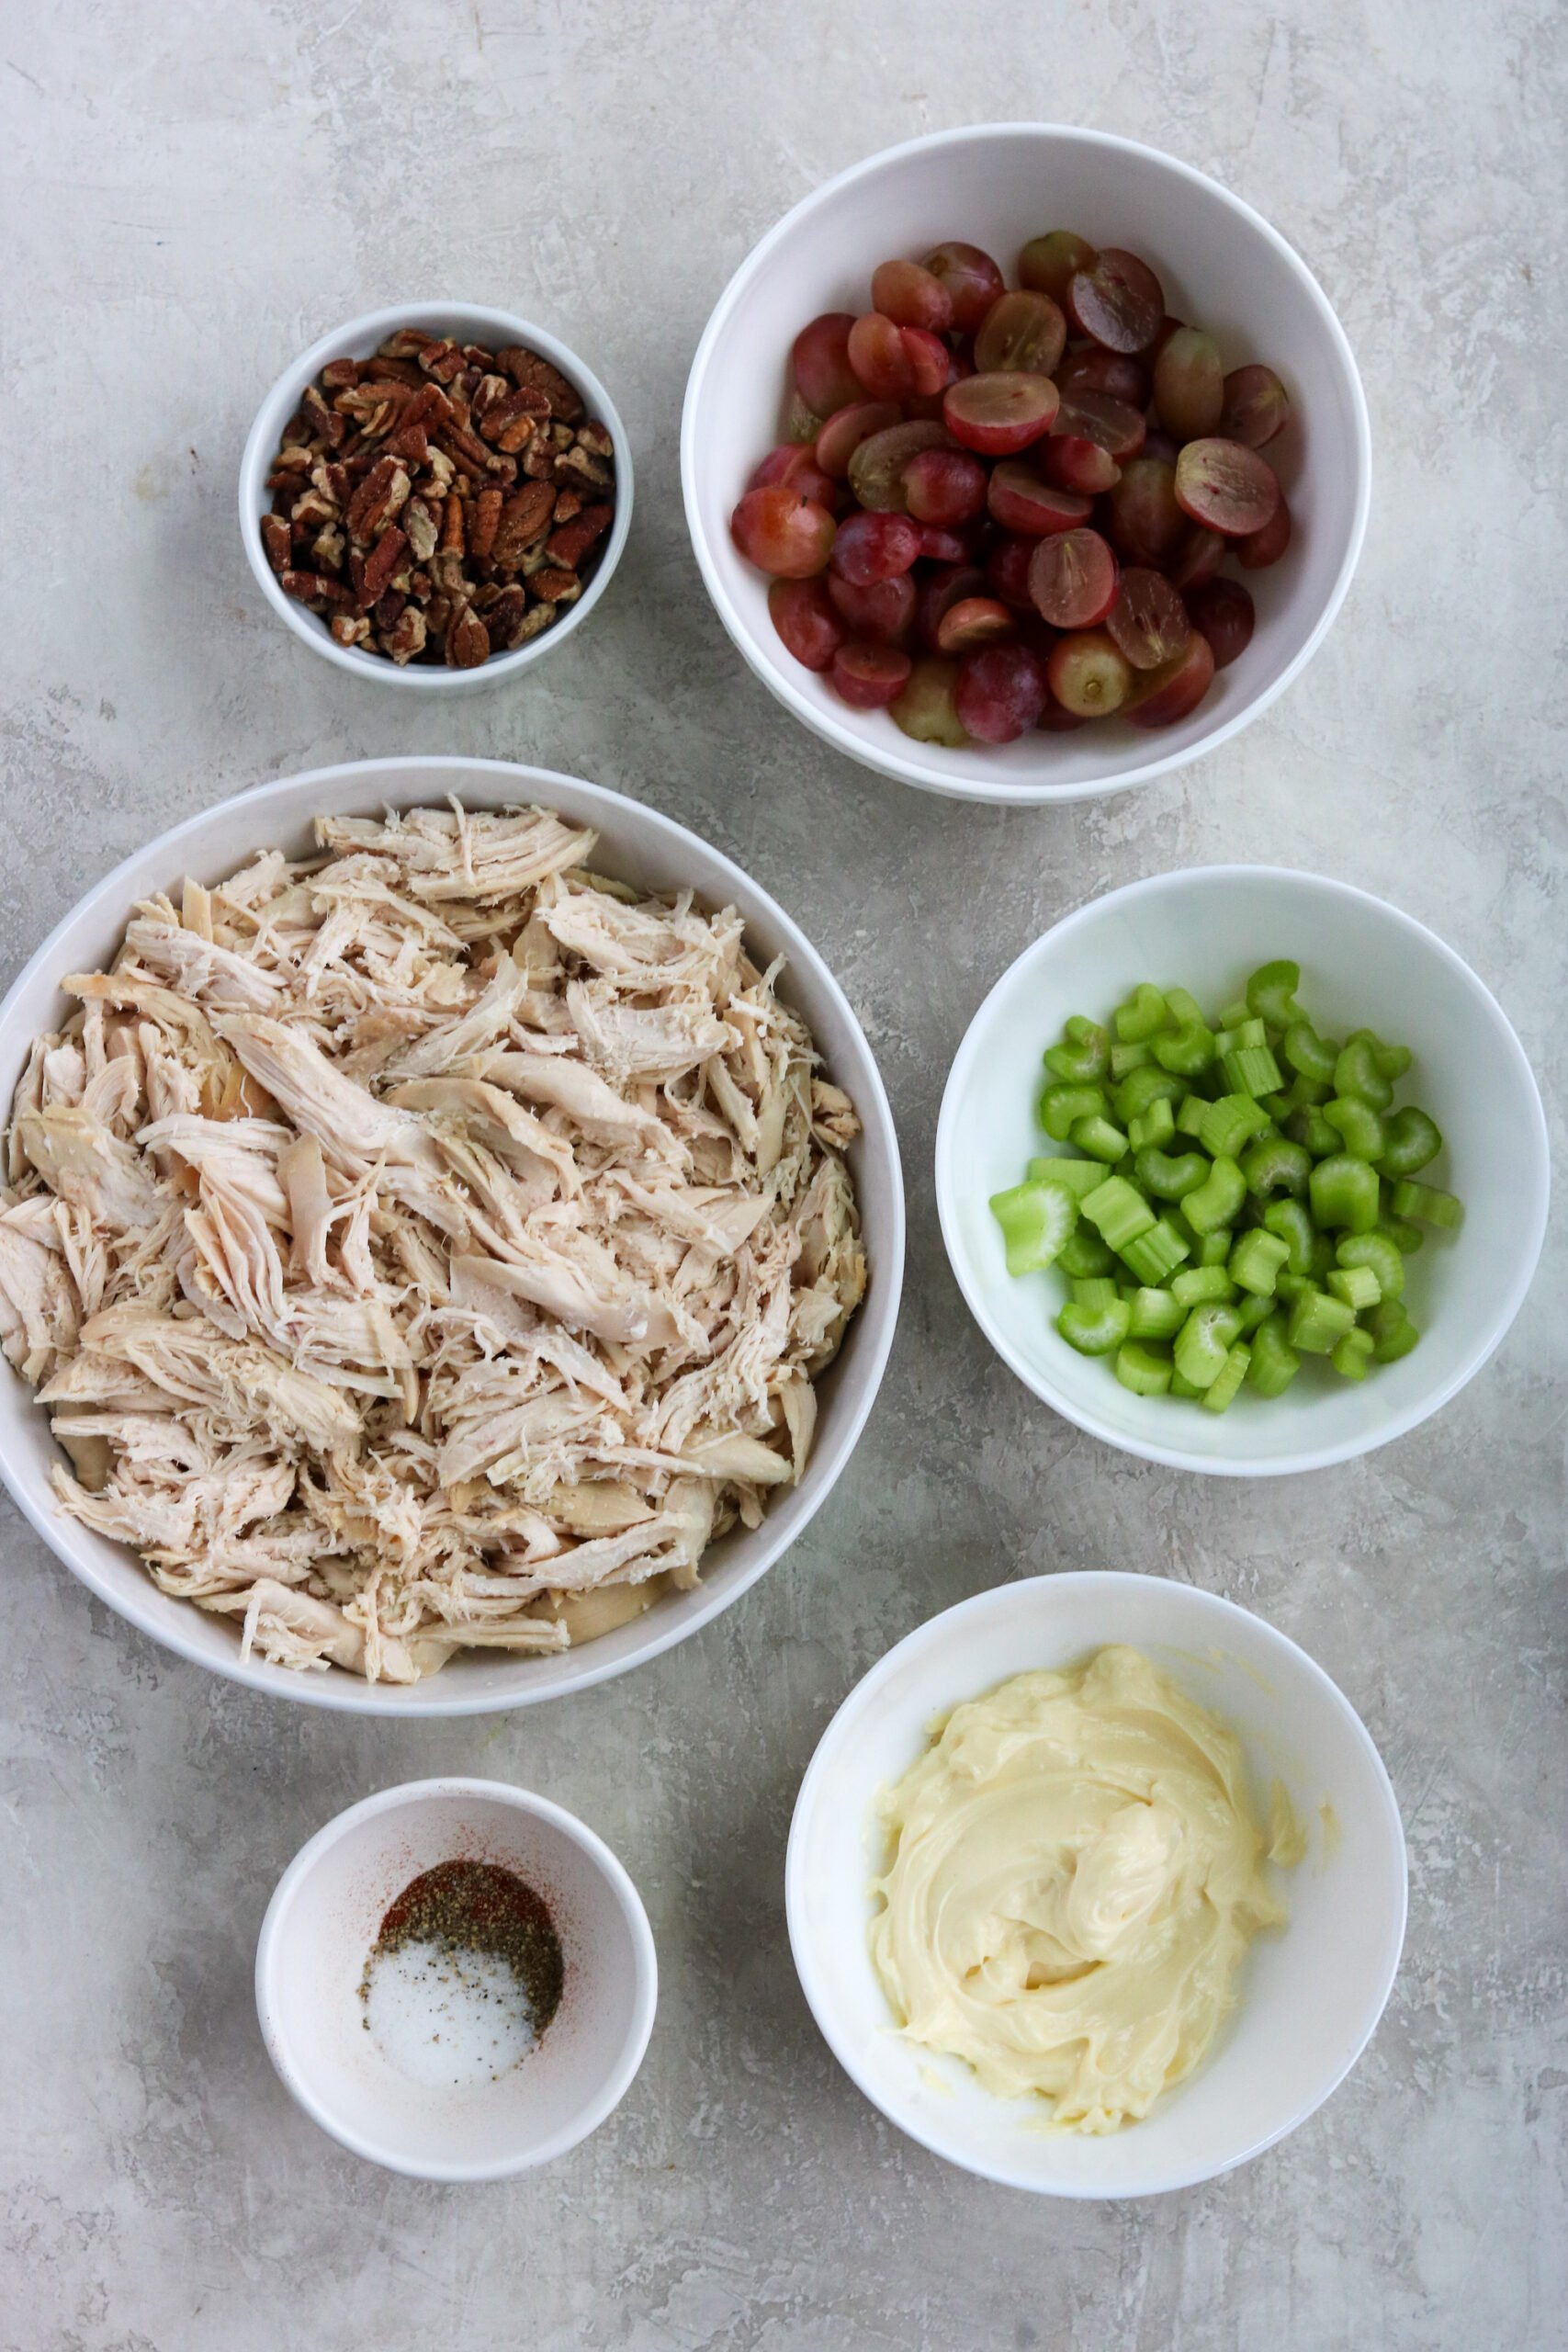 Ingredients to make a healthy recipe for chicken salad